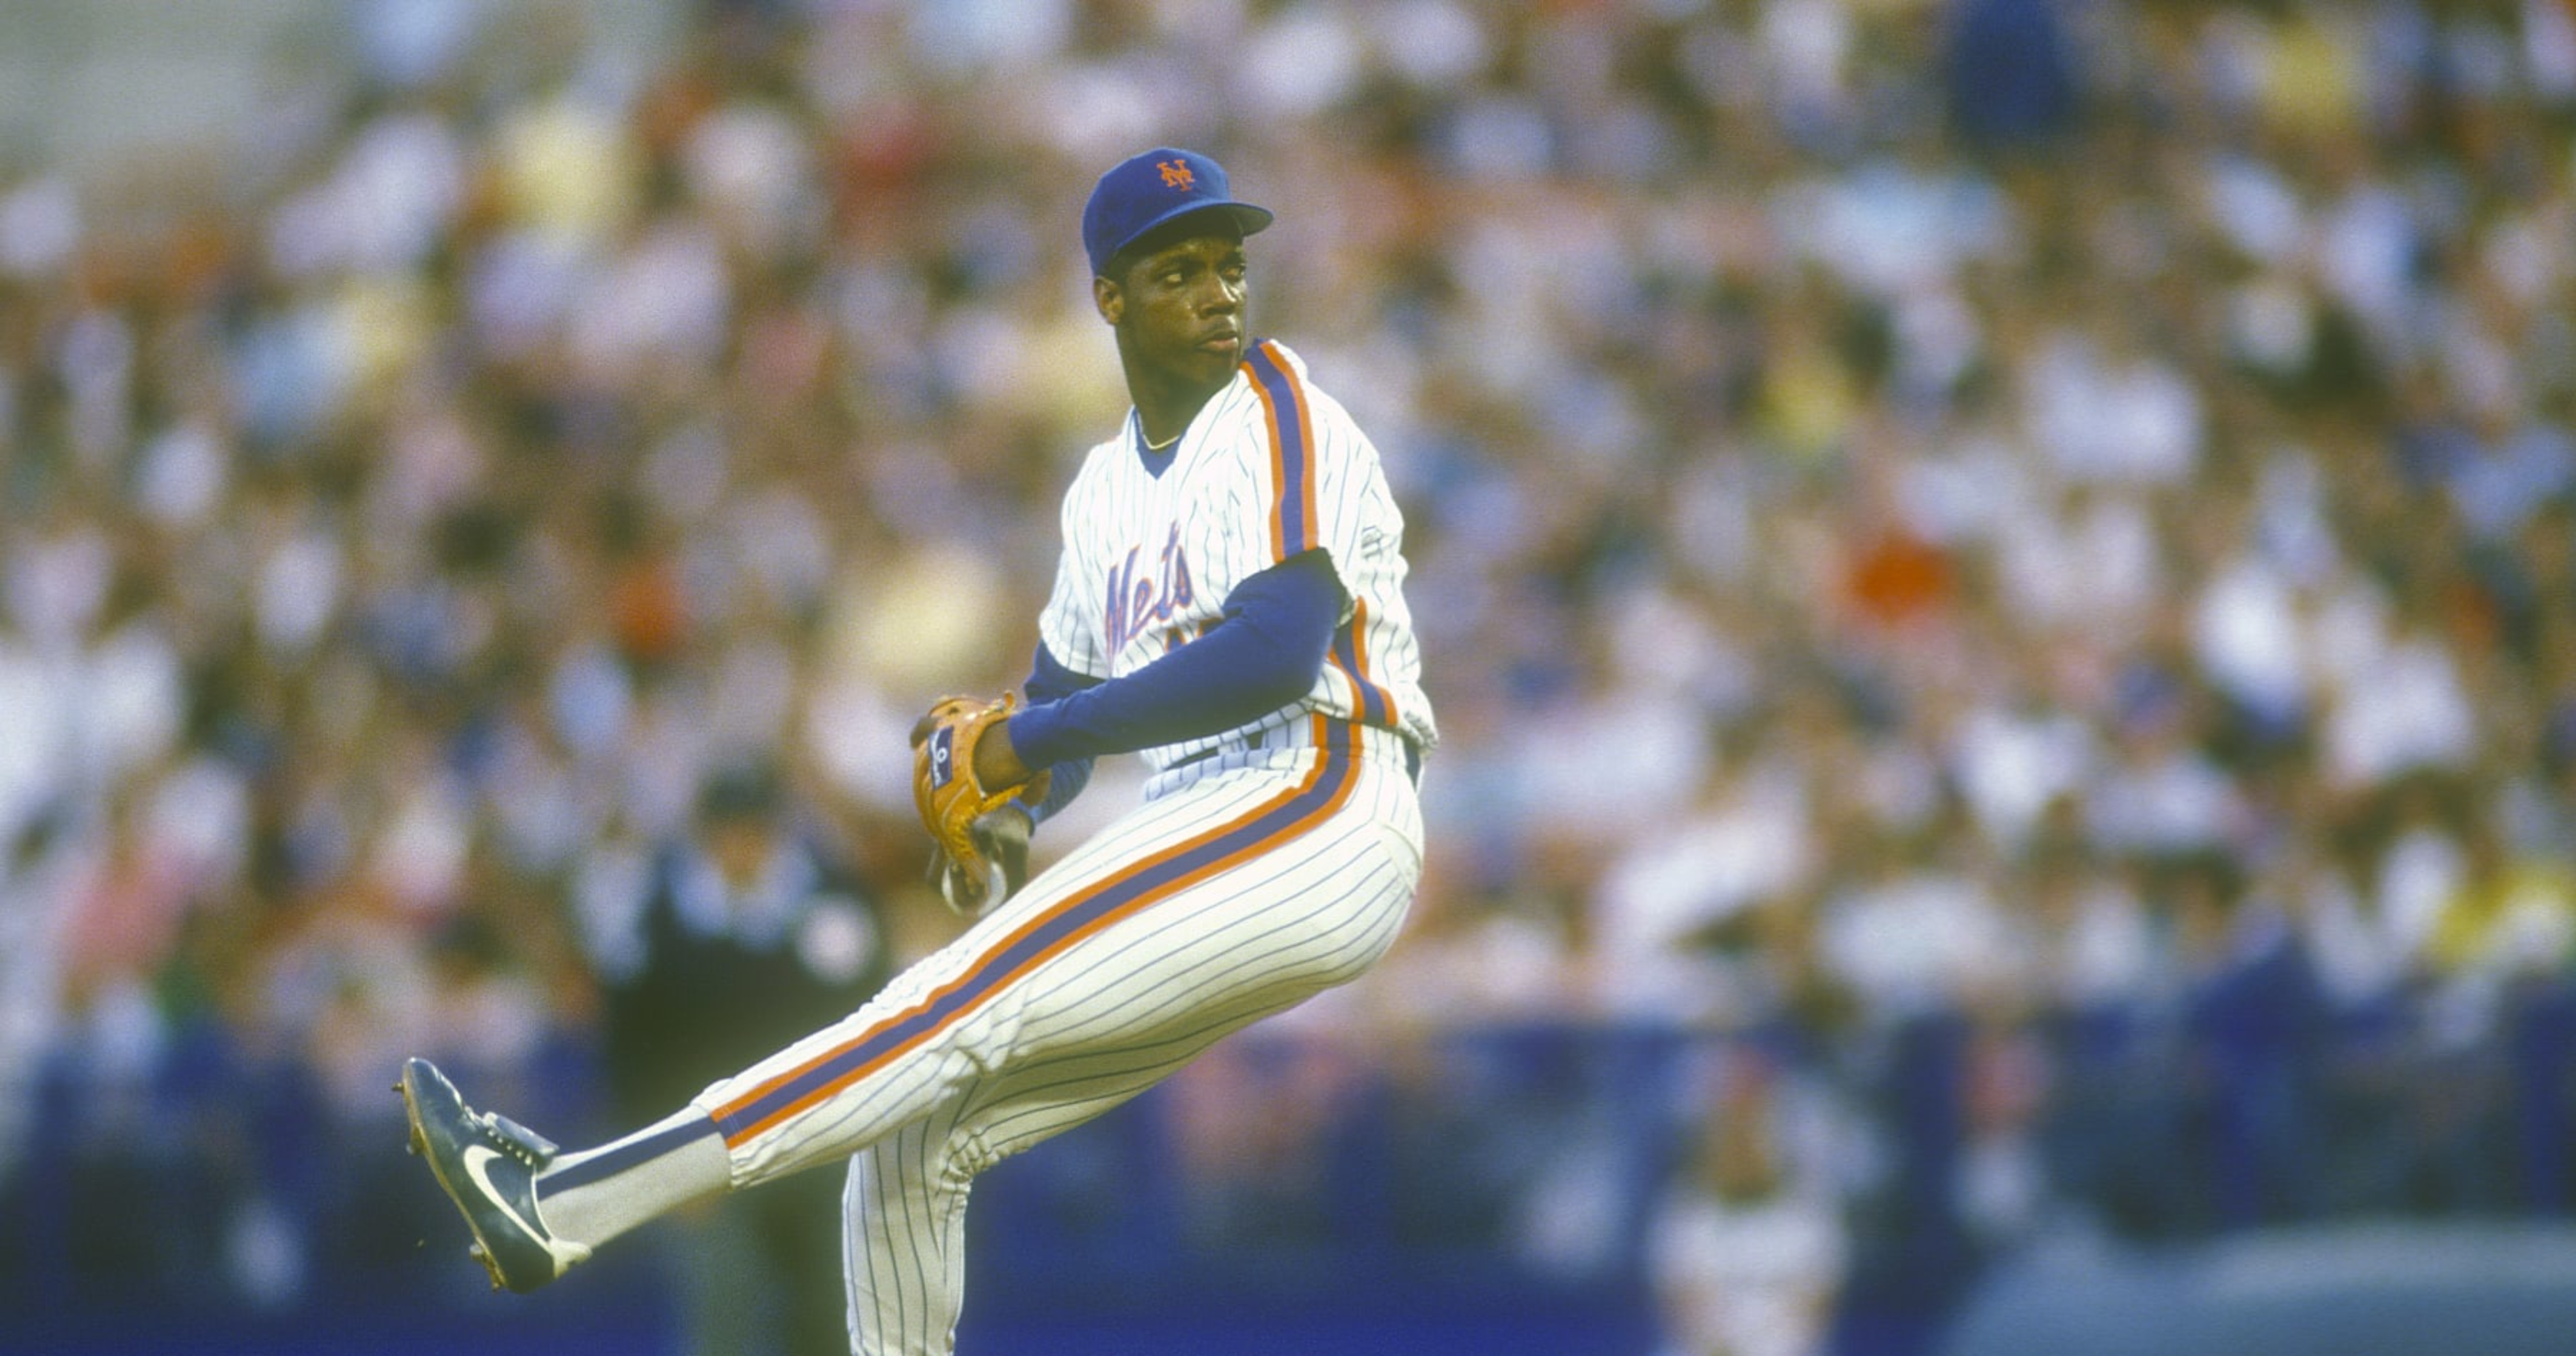 Mets to retire numbers for Doc Gooden and Darryl Strawberry – NBC New York